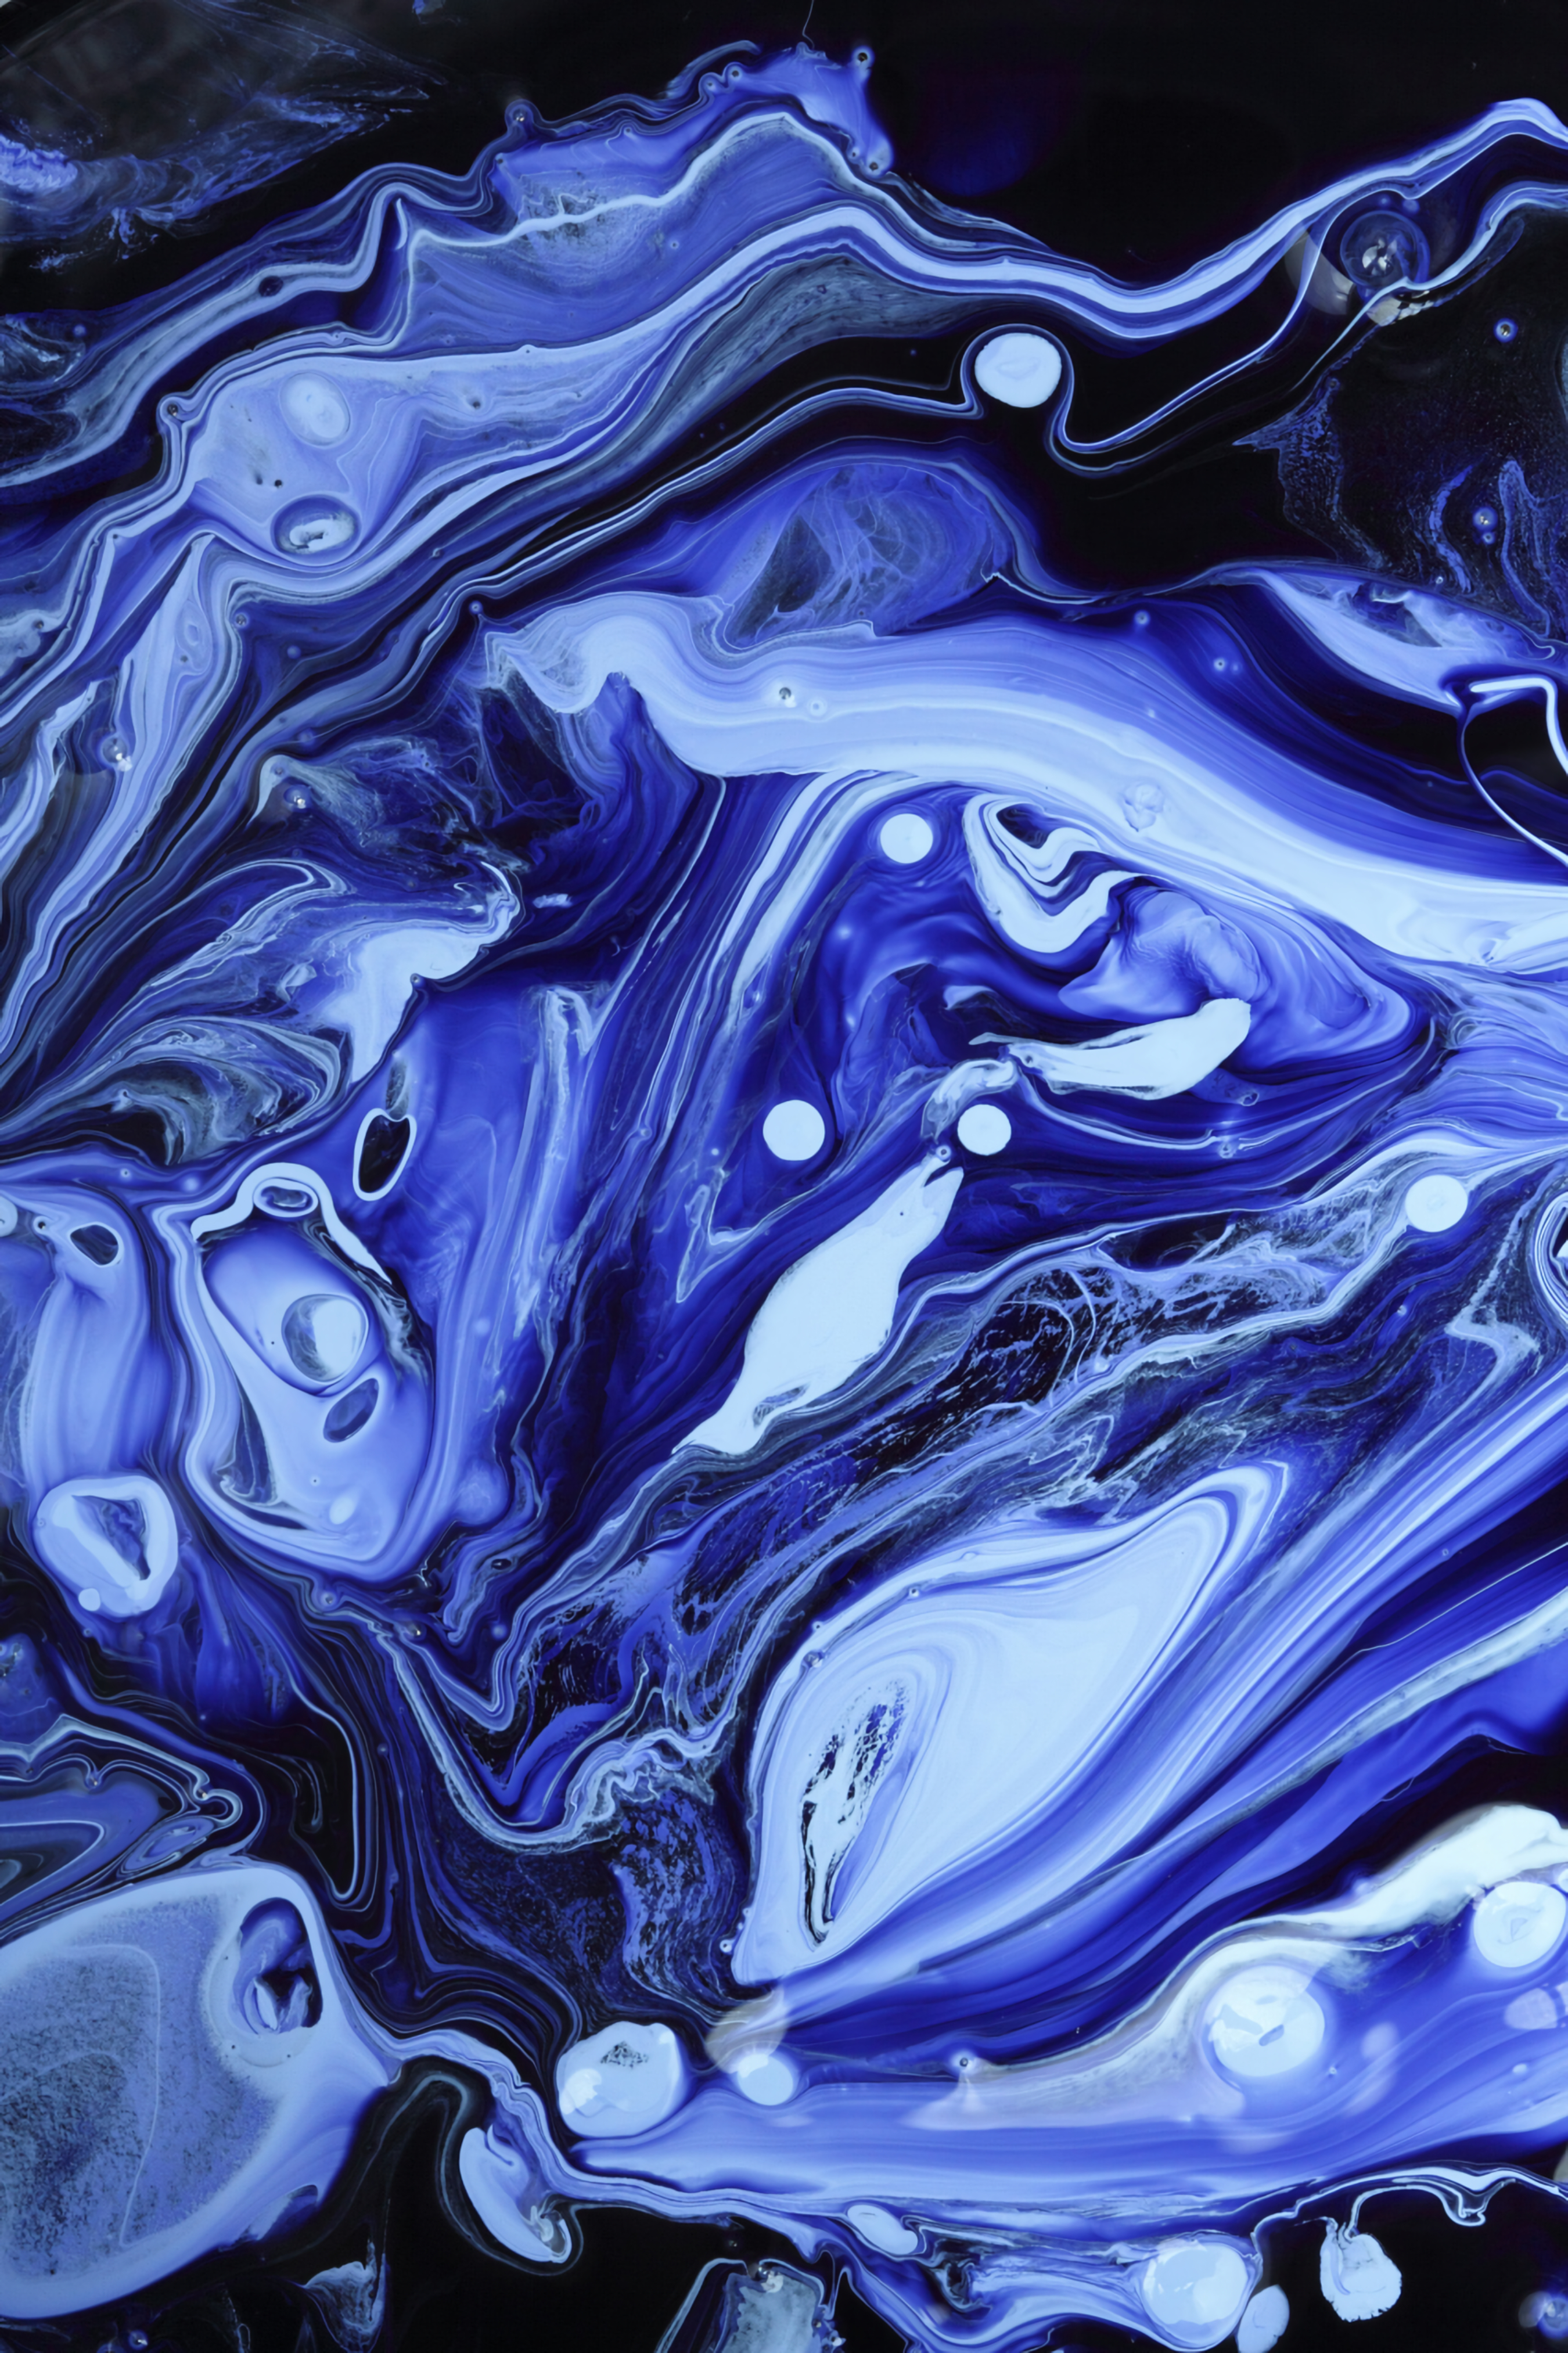 liquid, paint, stains, divorces, abstract, spots, chaotic mobile wallpaper